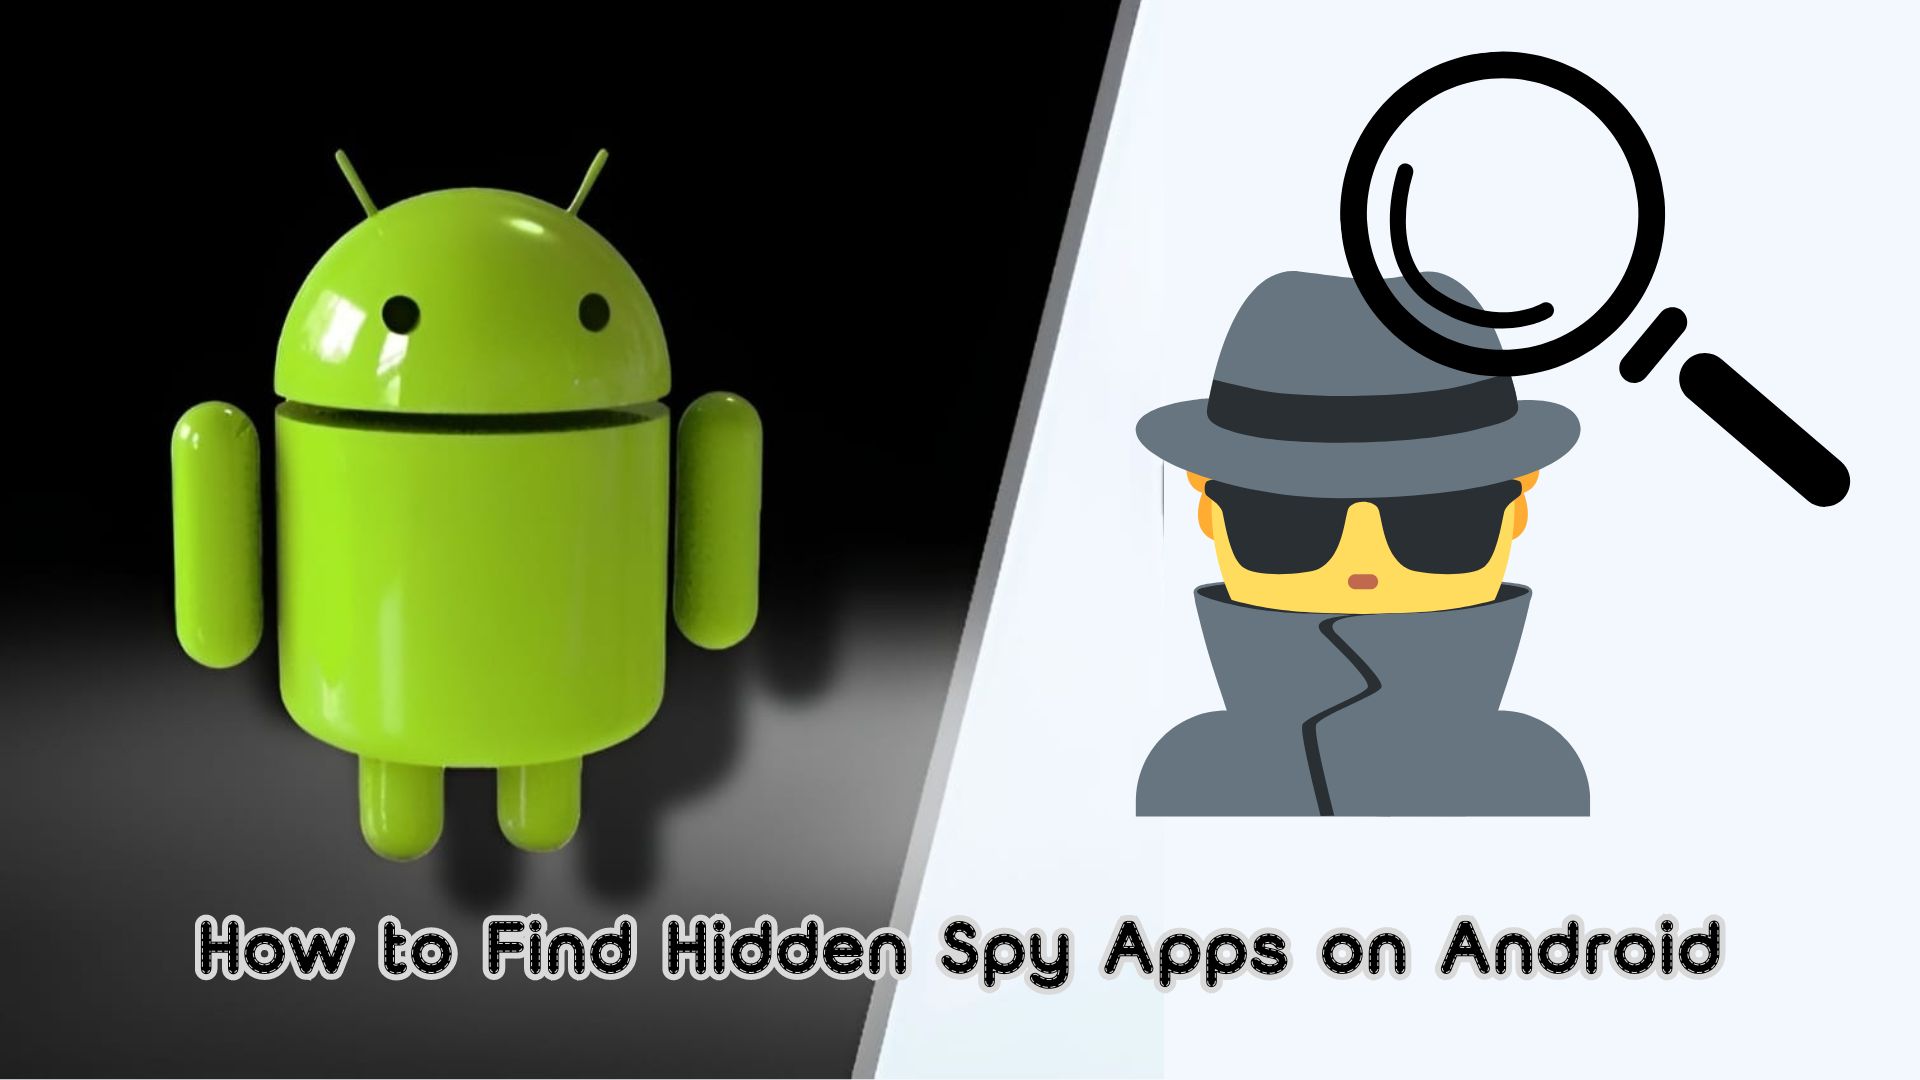 How to Find Hidden Spy Apps on Android?